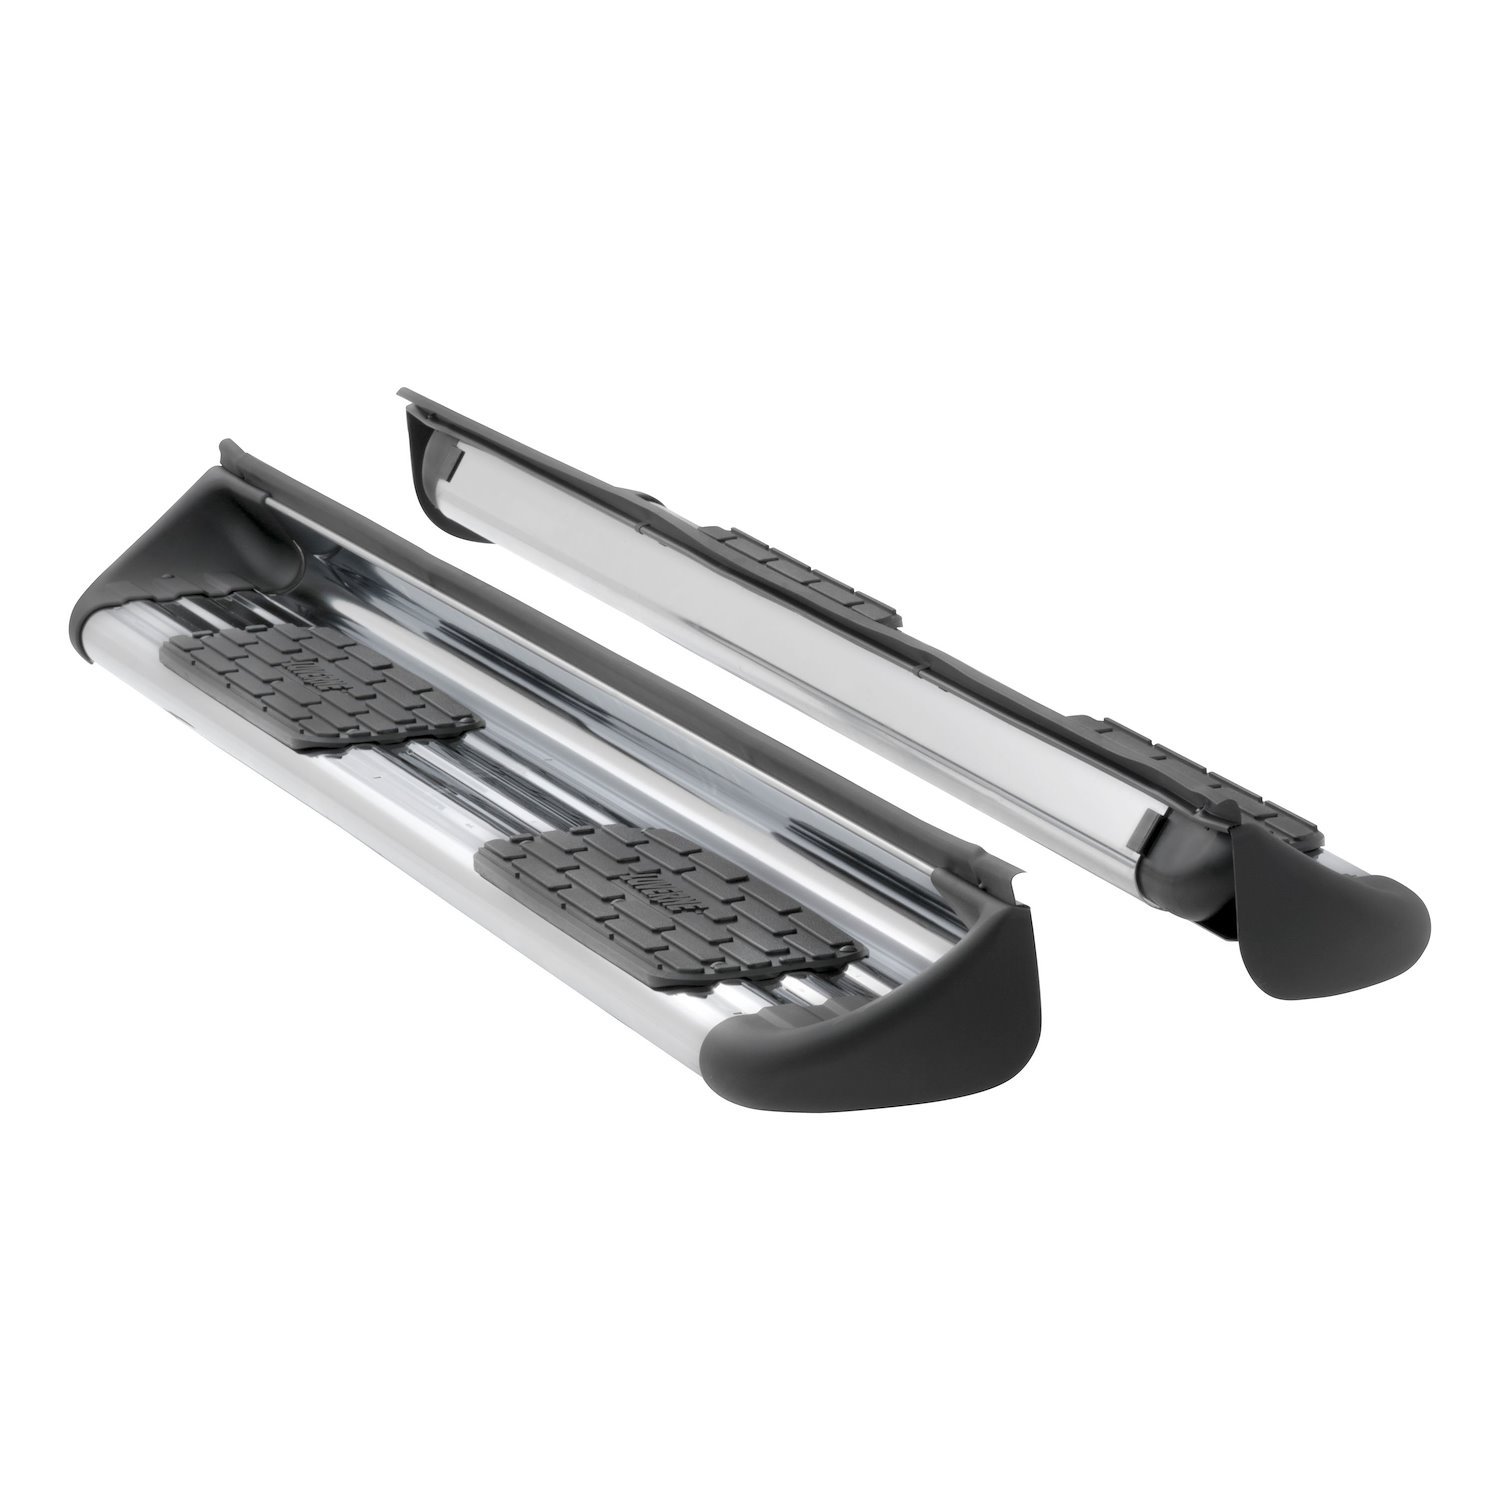 481033-571032 Polished Stainless Steel Side Entry Steps Fits Select Ram 1500, 2500, 3500 Crew Cab